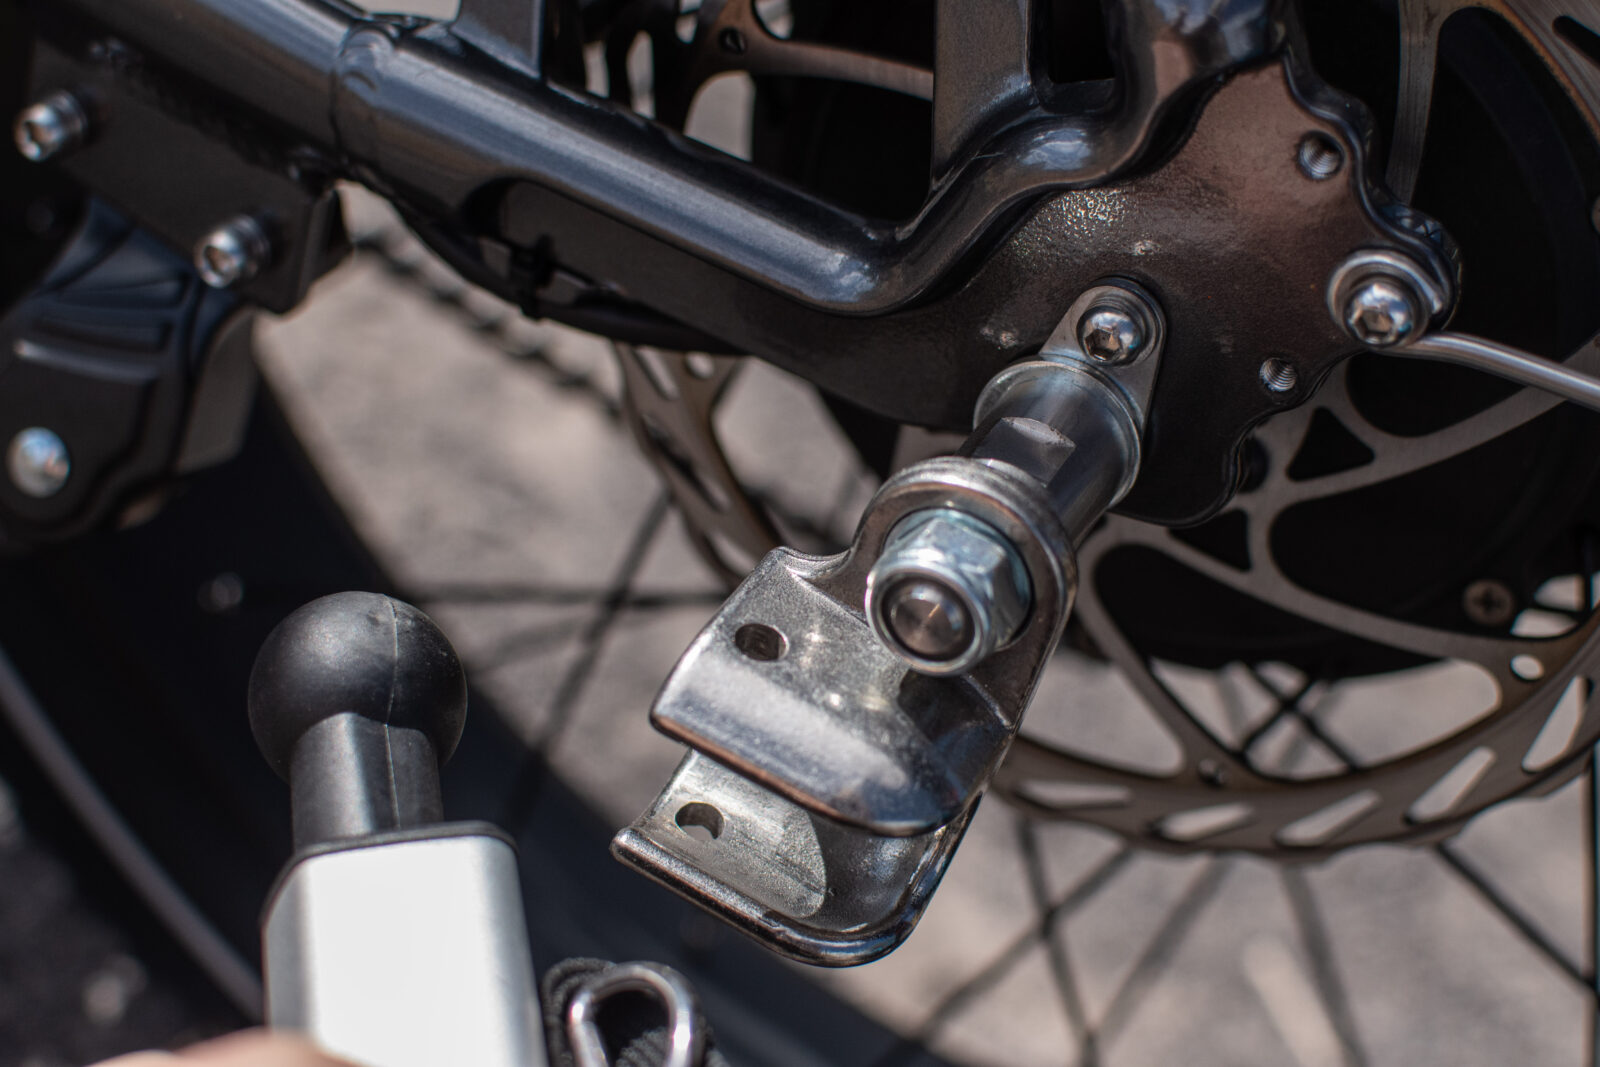 Quick Release Hitch Adapter for Trailers - The Robert Axle Project